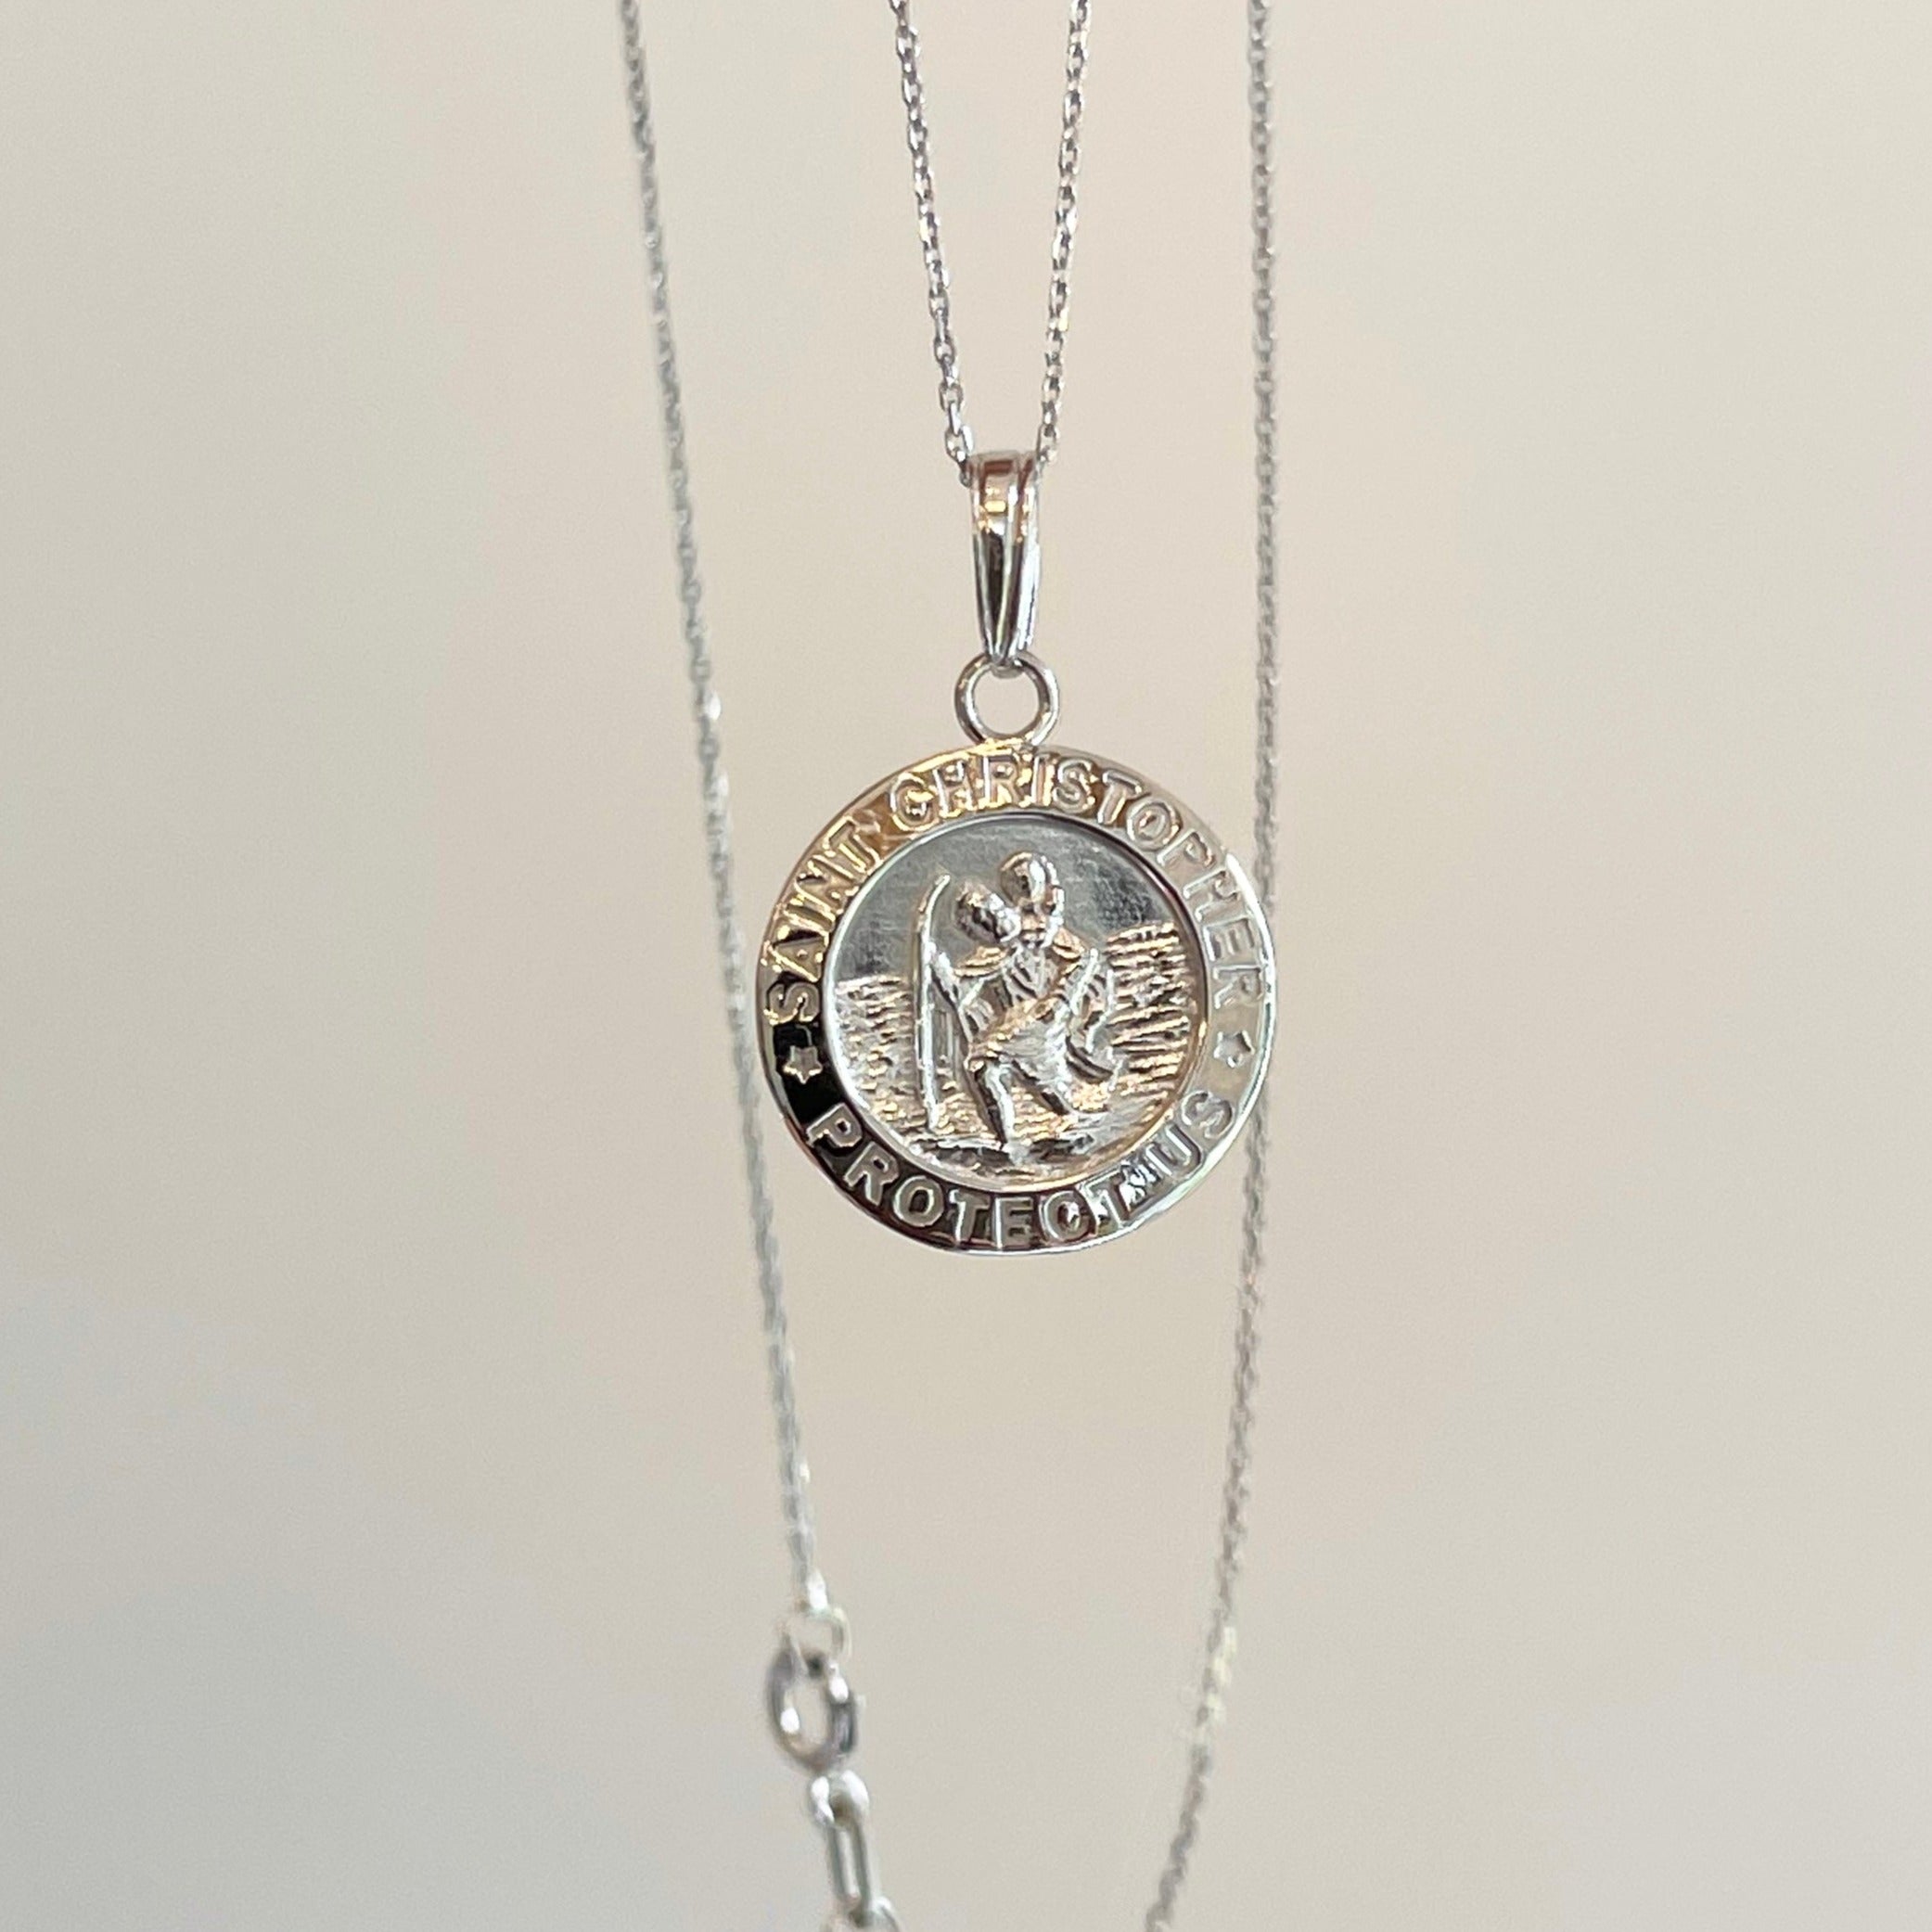 9ct Yellow Gold Saint Christopher Pendant with Curb Chain - Walker & Hall